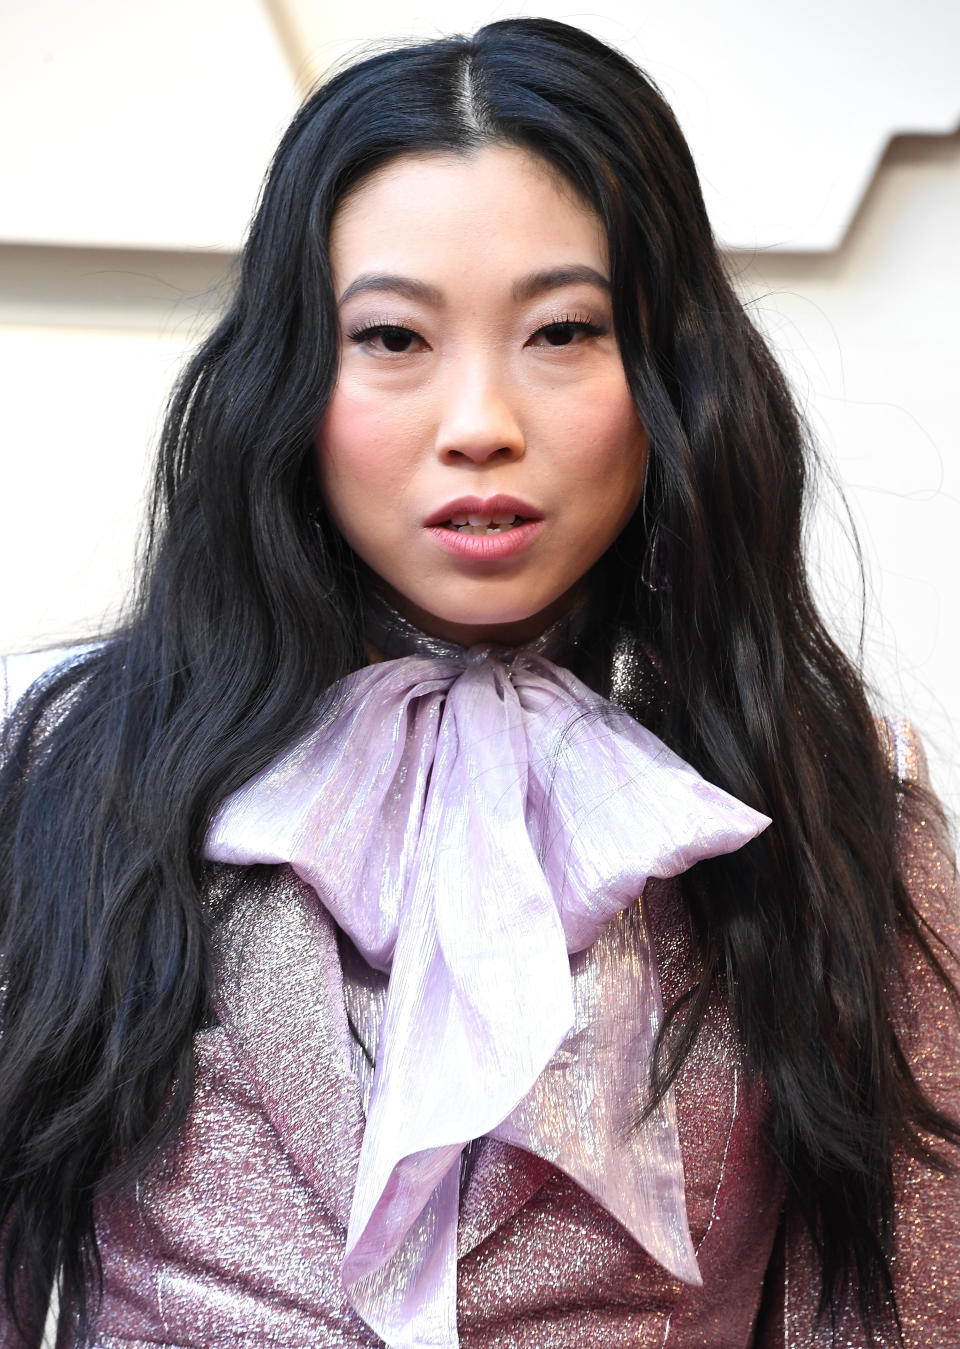 Awkwafina at the Oscars in Los Angeles on Feb. 24. Makeup by <a href="https://www.instagram.com/p/BuS2SZUn9Ha/" target="_blank" rel="noopener noreferrer">Mai Quynh</a> using Kiehl's and Armani products. Hair by <a href="https://www.instagram.com/anhcotran/p/BuS7xTegkXl/?hl=en" target="_blank" rel="noopener noreferrer">Anh Co Tran</a>.